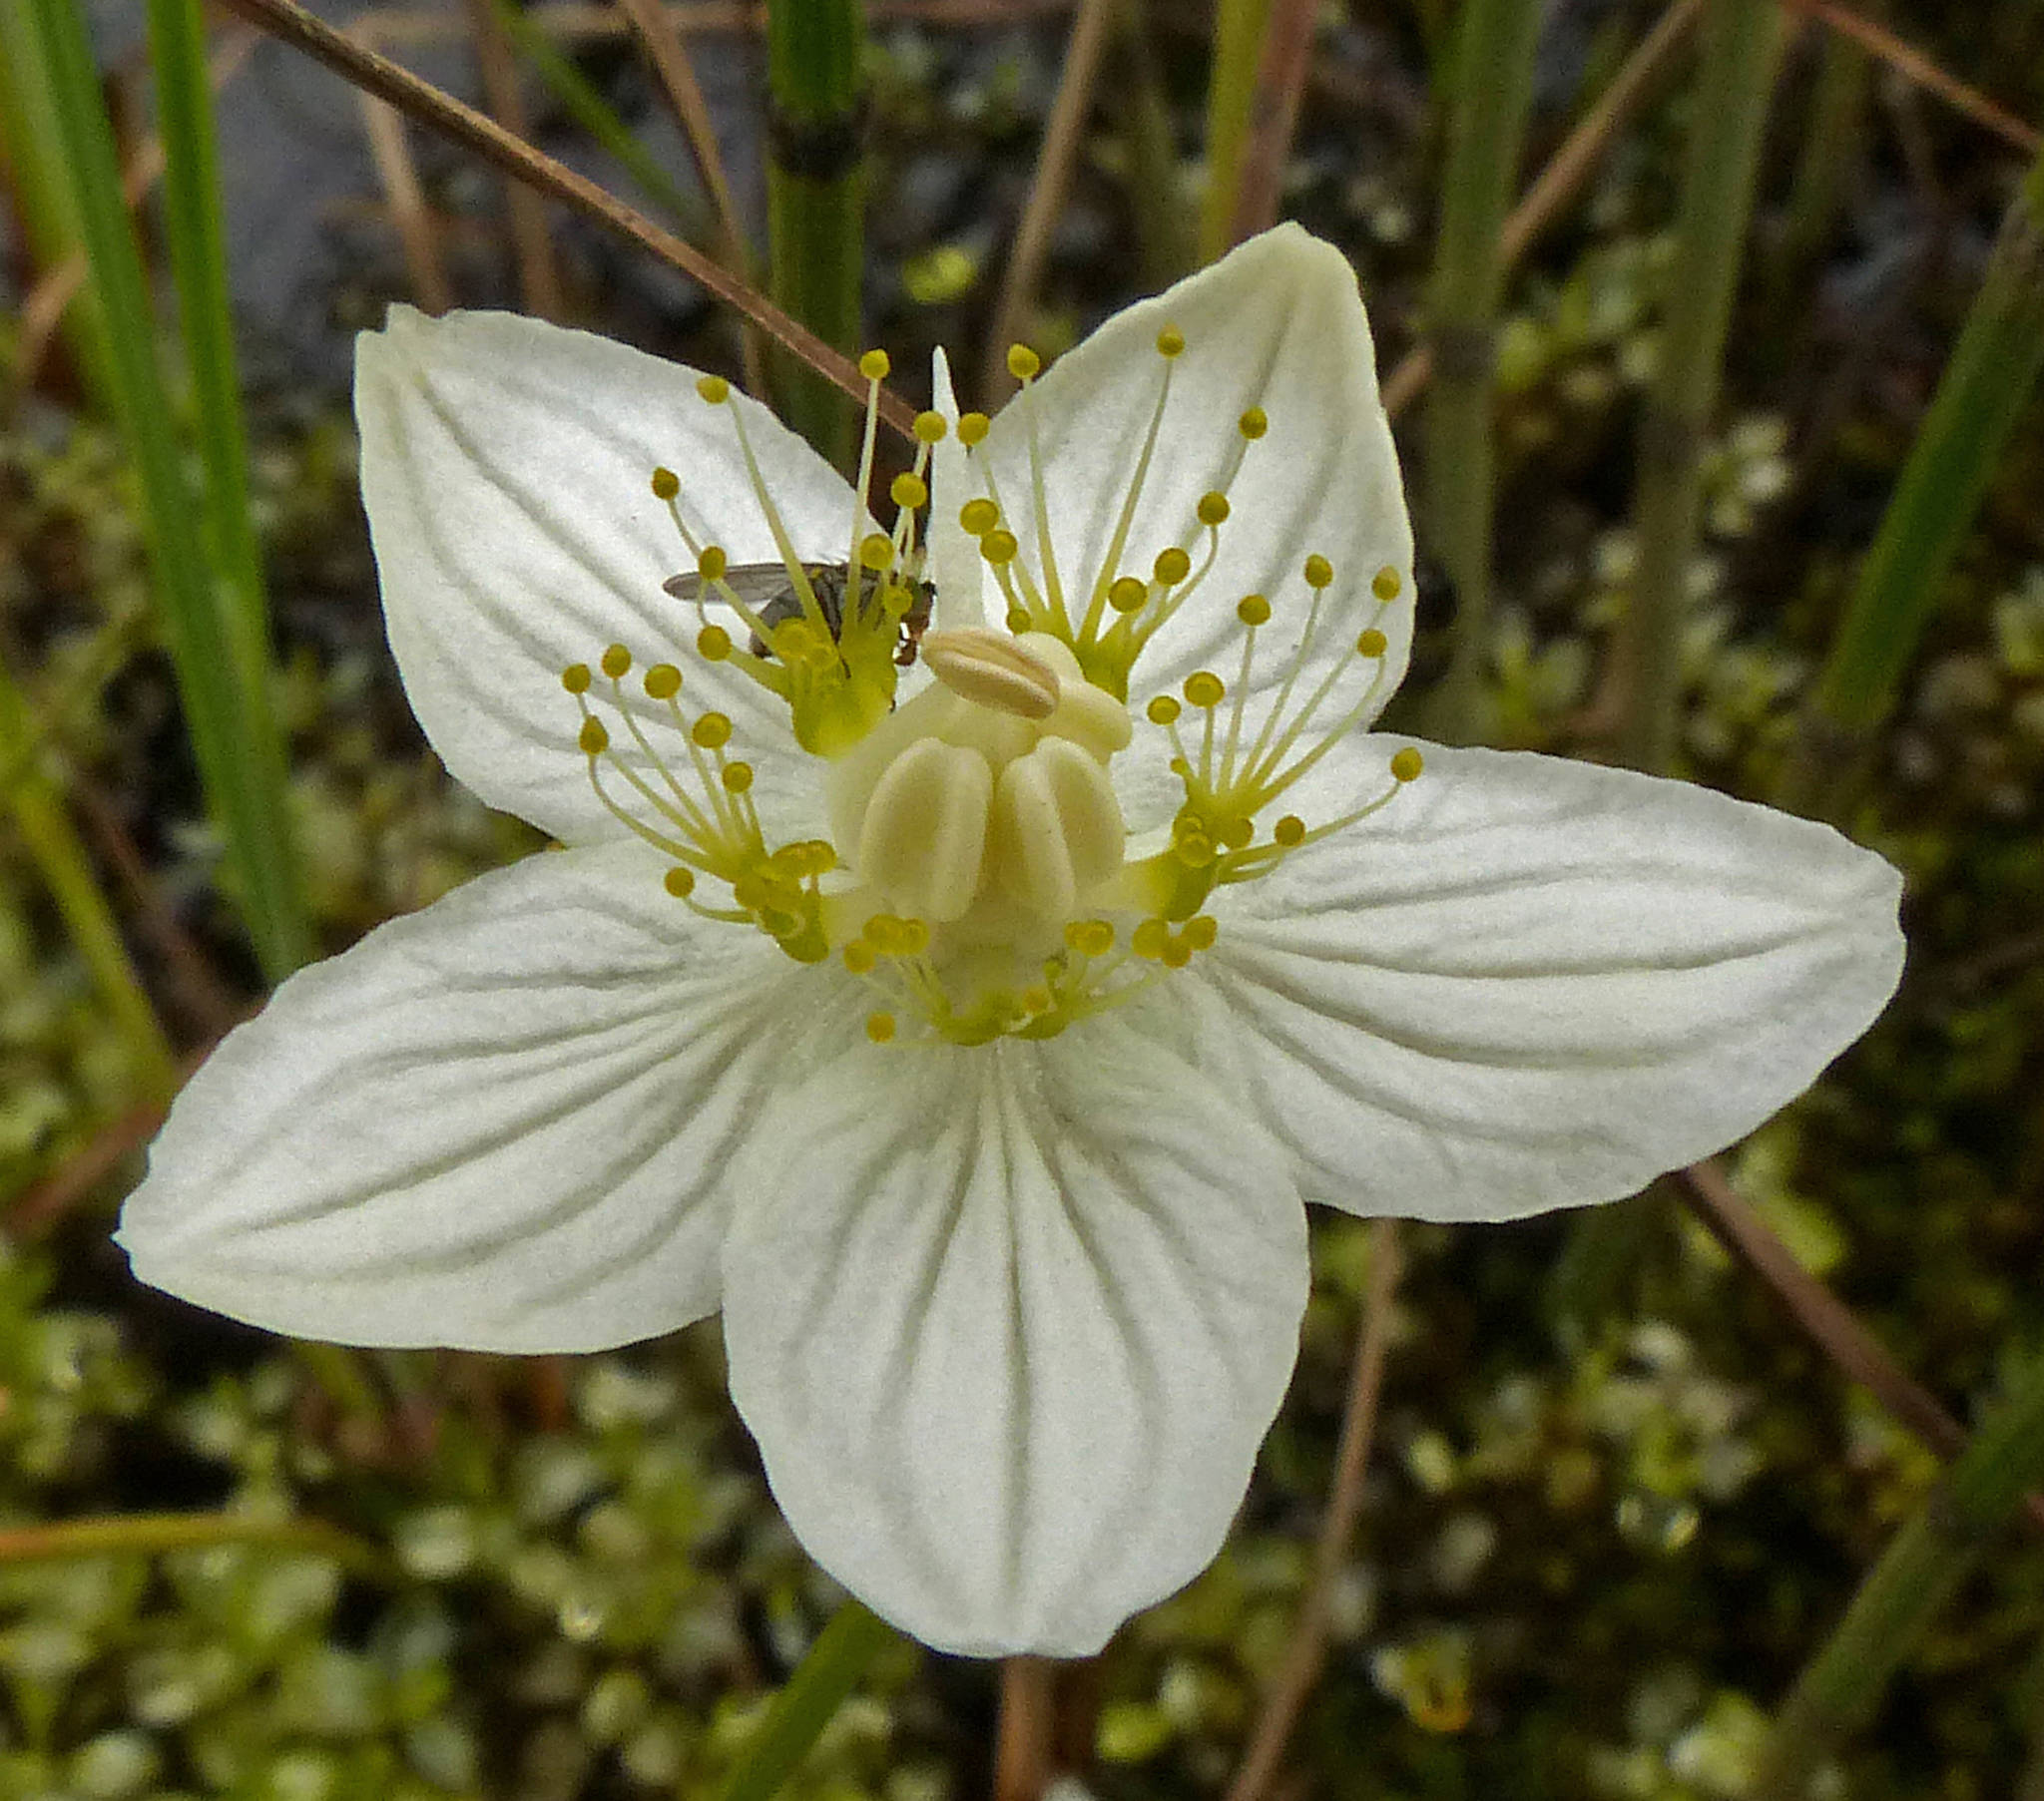 The flower of northern grass-of-Parnassus, showing the staminodes with droplets at the tips, fat pollen sacs on the stamens, and a glimpse of a small insect crawling down to the nectar. (Bob Armstrong | Courtesy Photo)